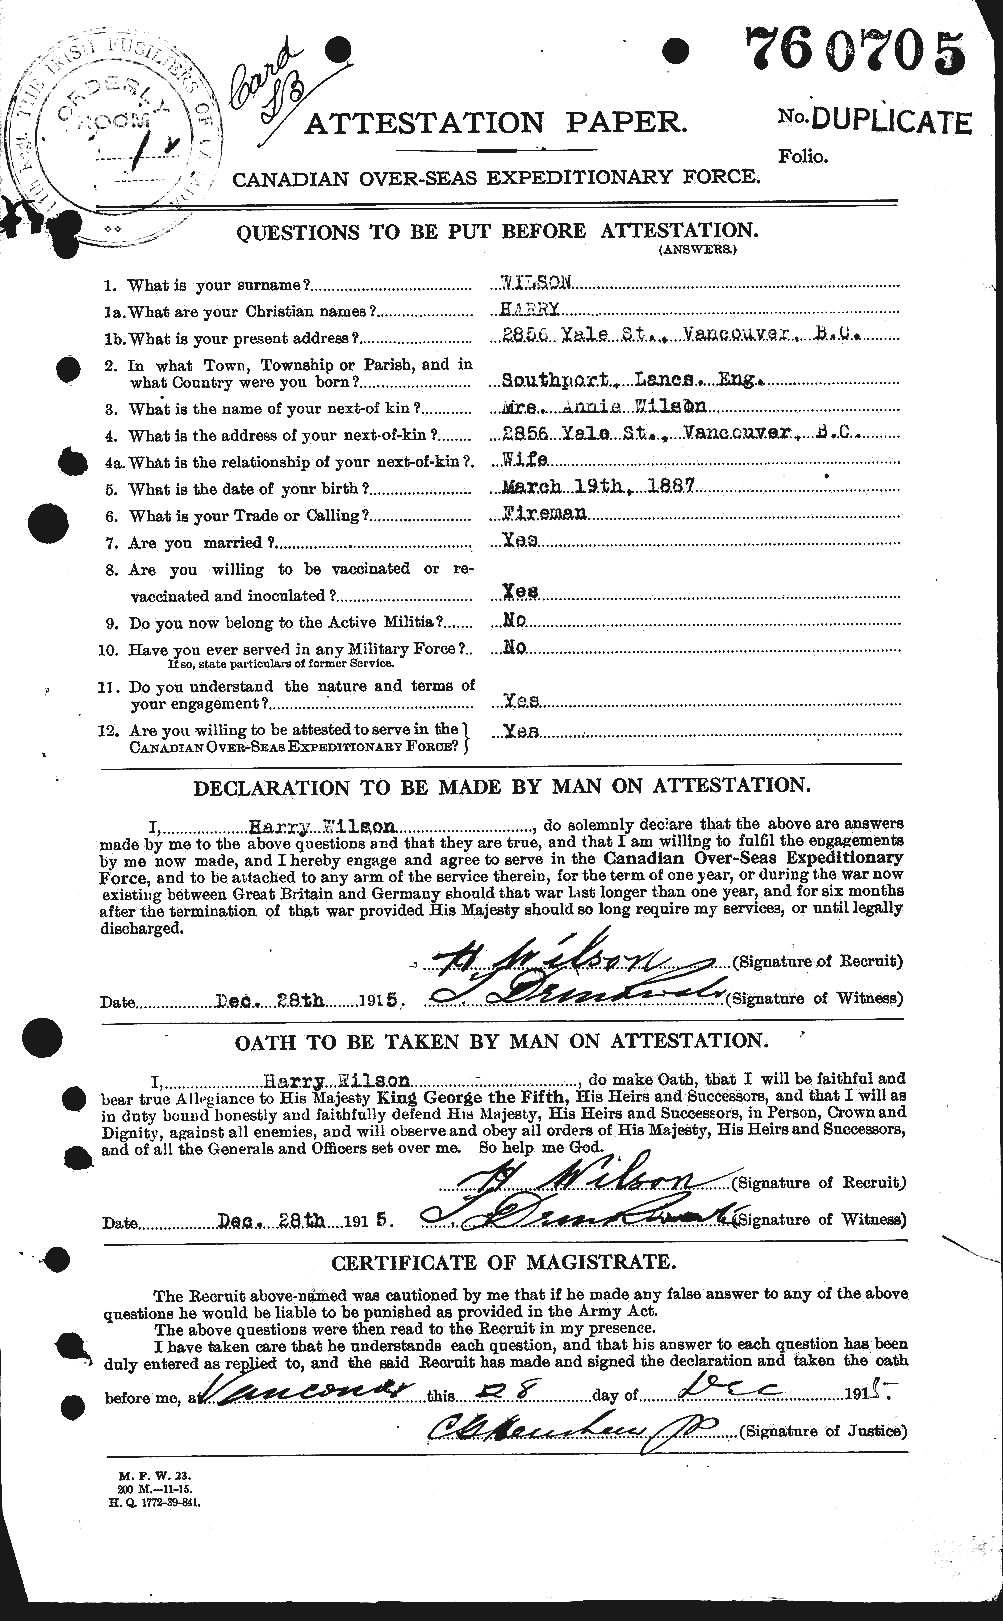 Personnel Records of the First World War - CEF 679428a